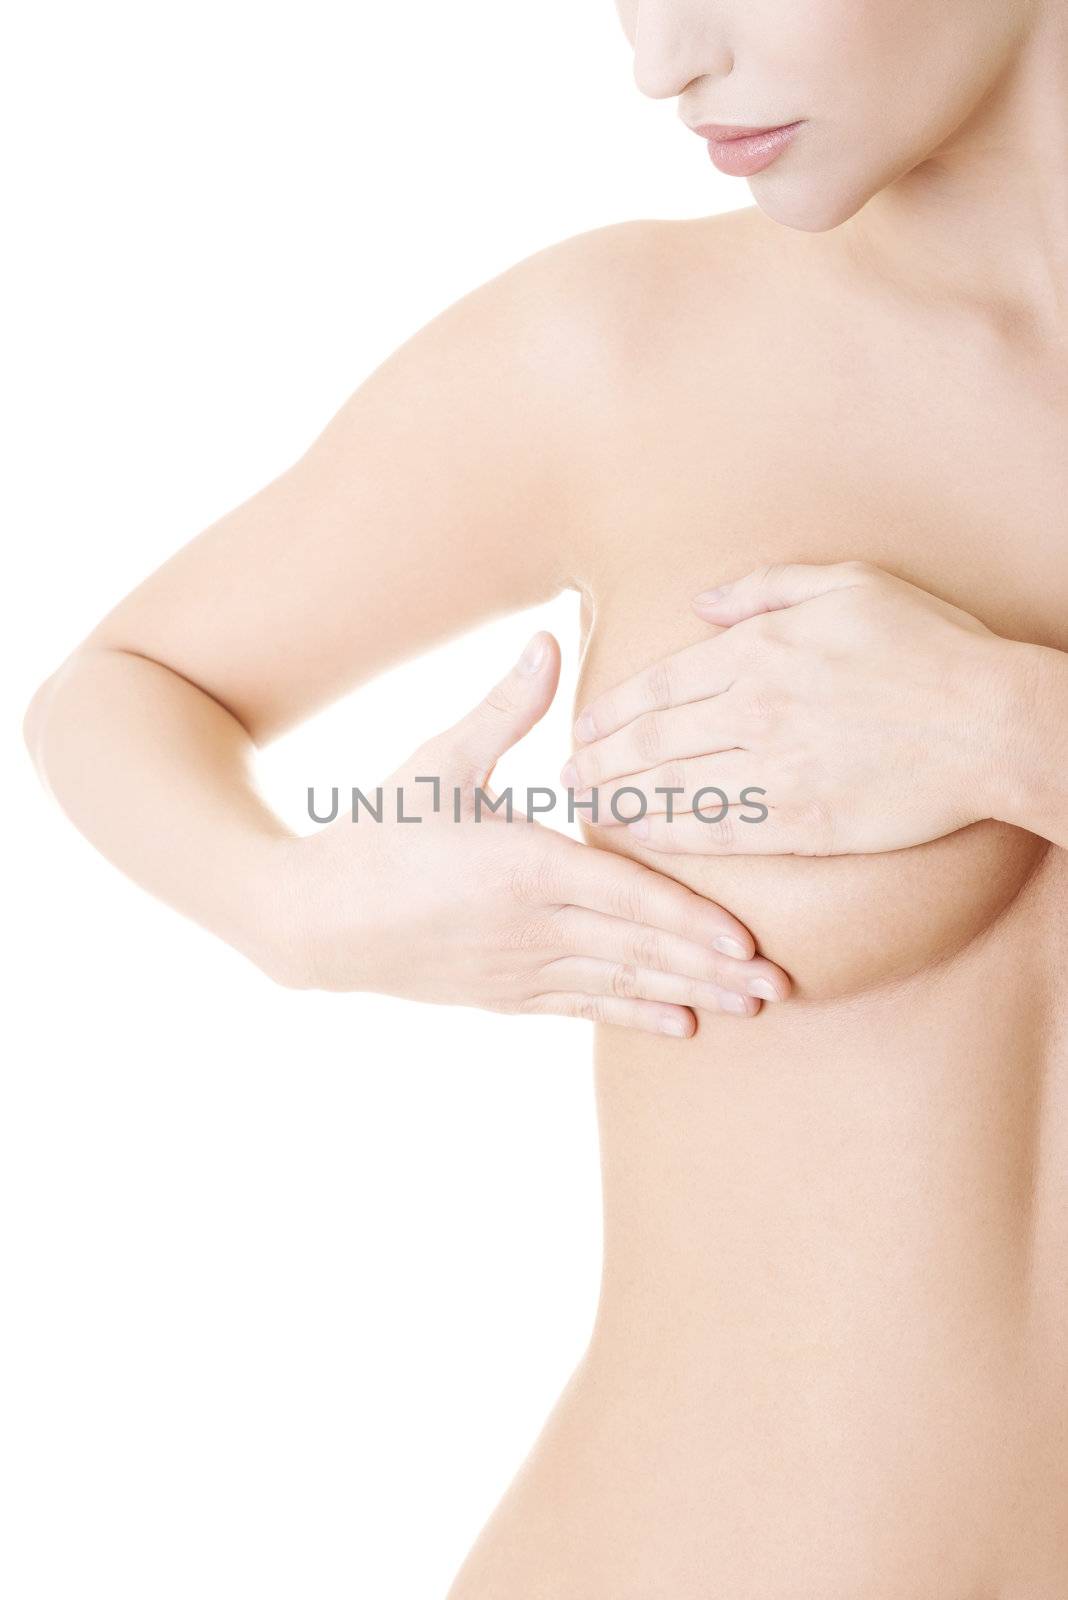 Caucasian adult woman examining her breast for lumps or signs of breast cancer